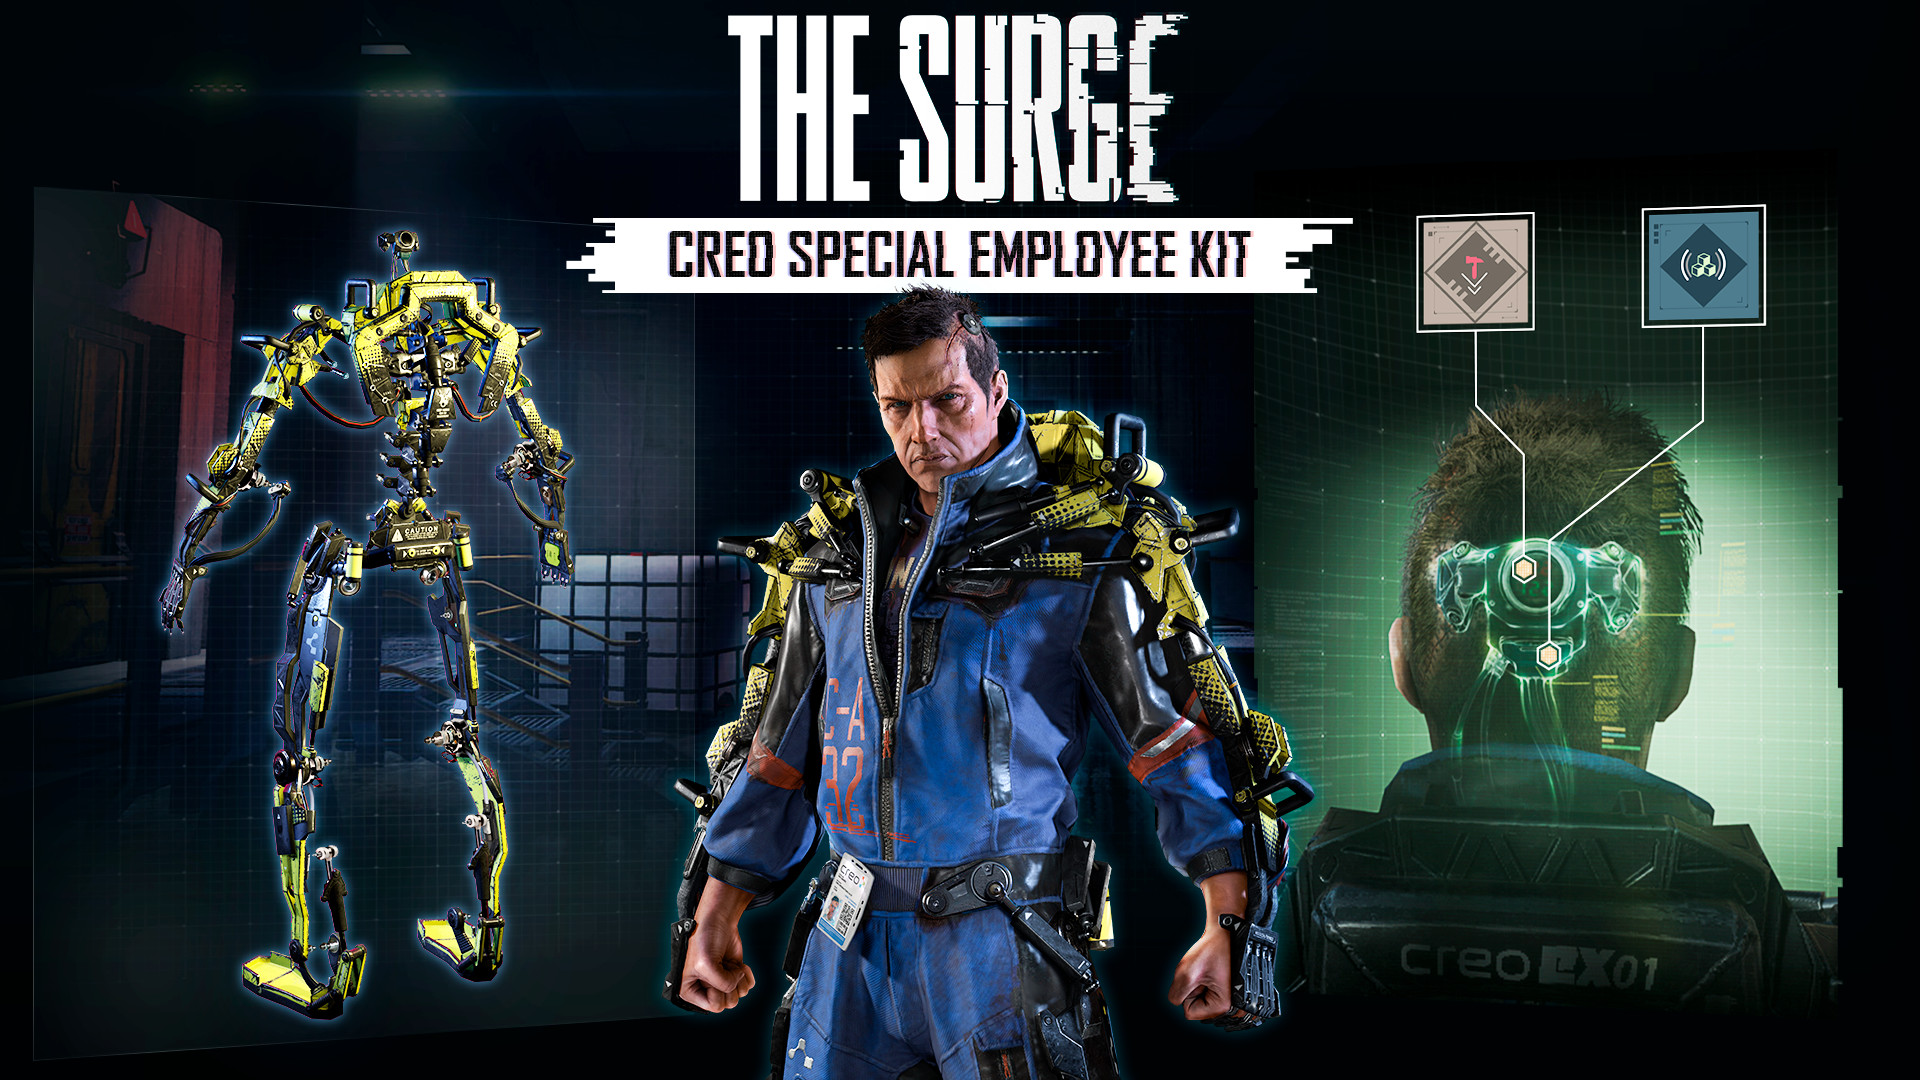 The Surge - CREO Special Employee Kit Featured Screenshot #1